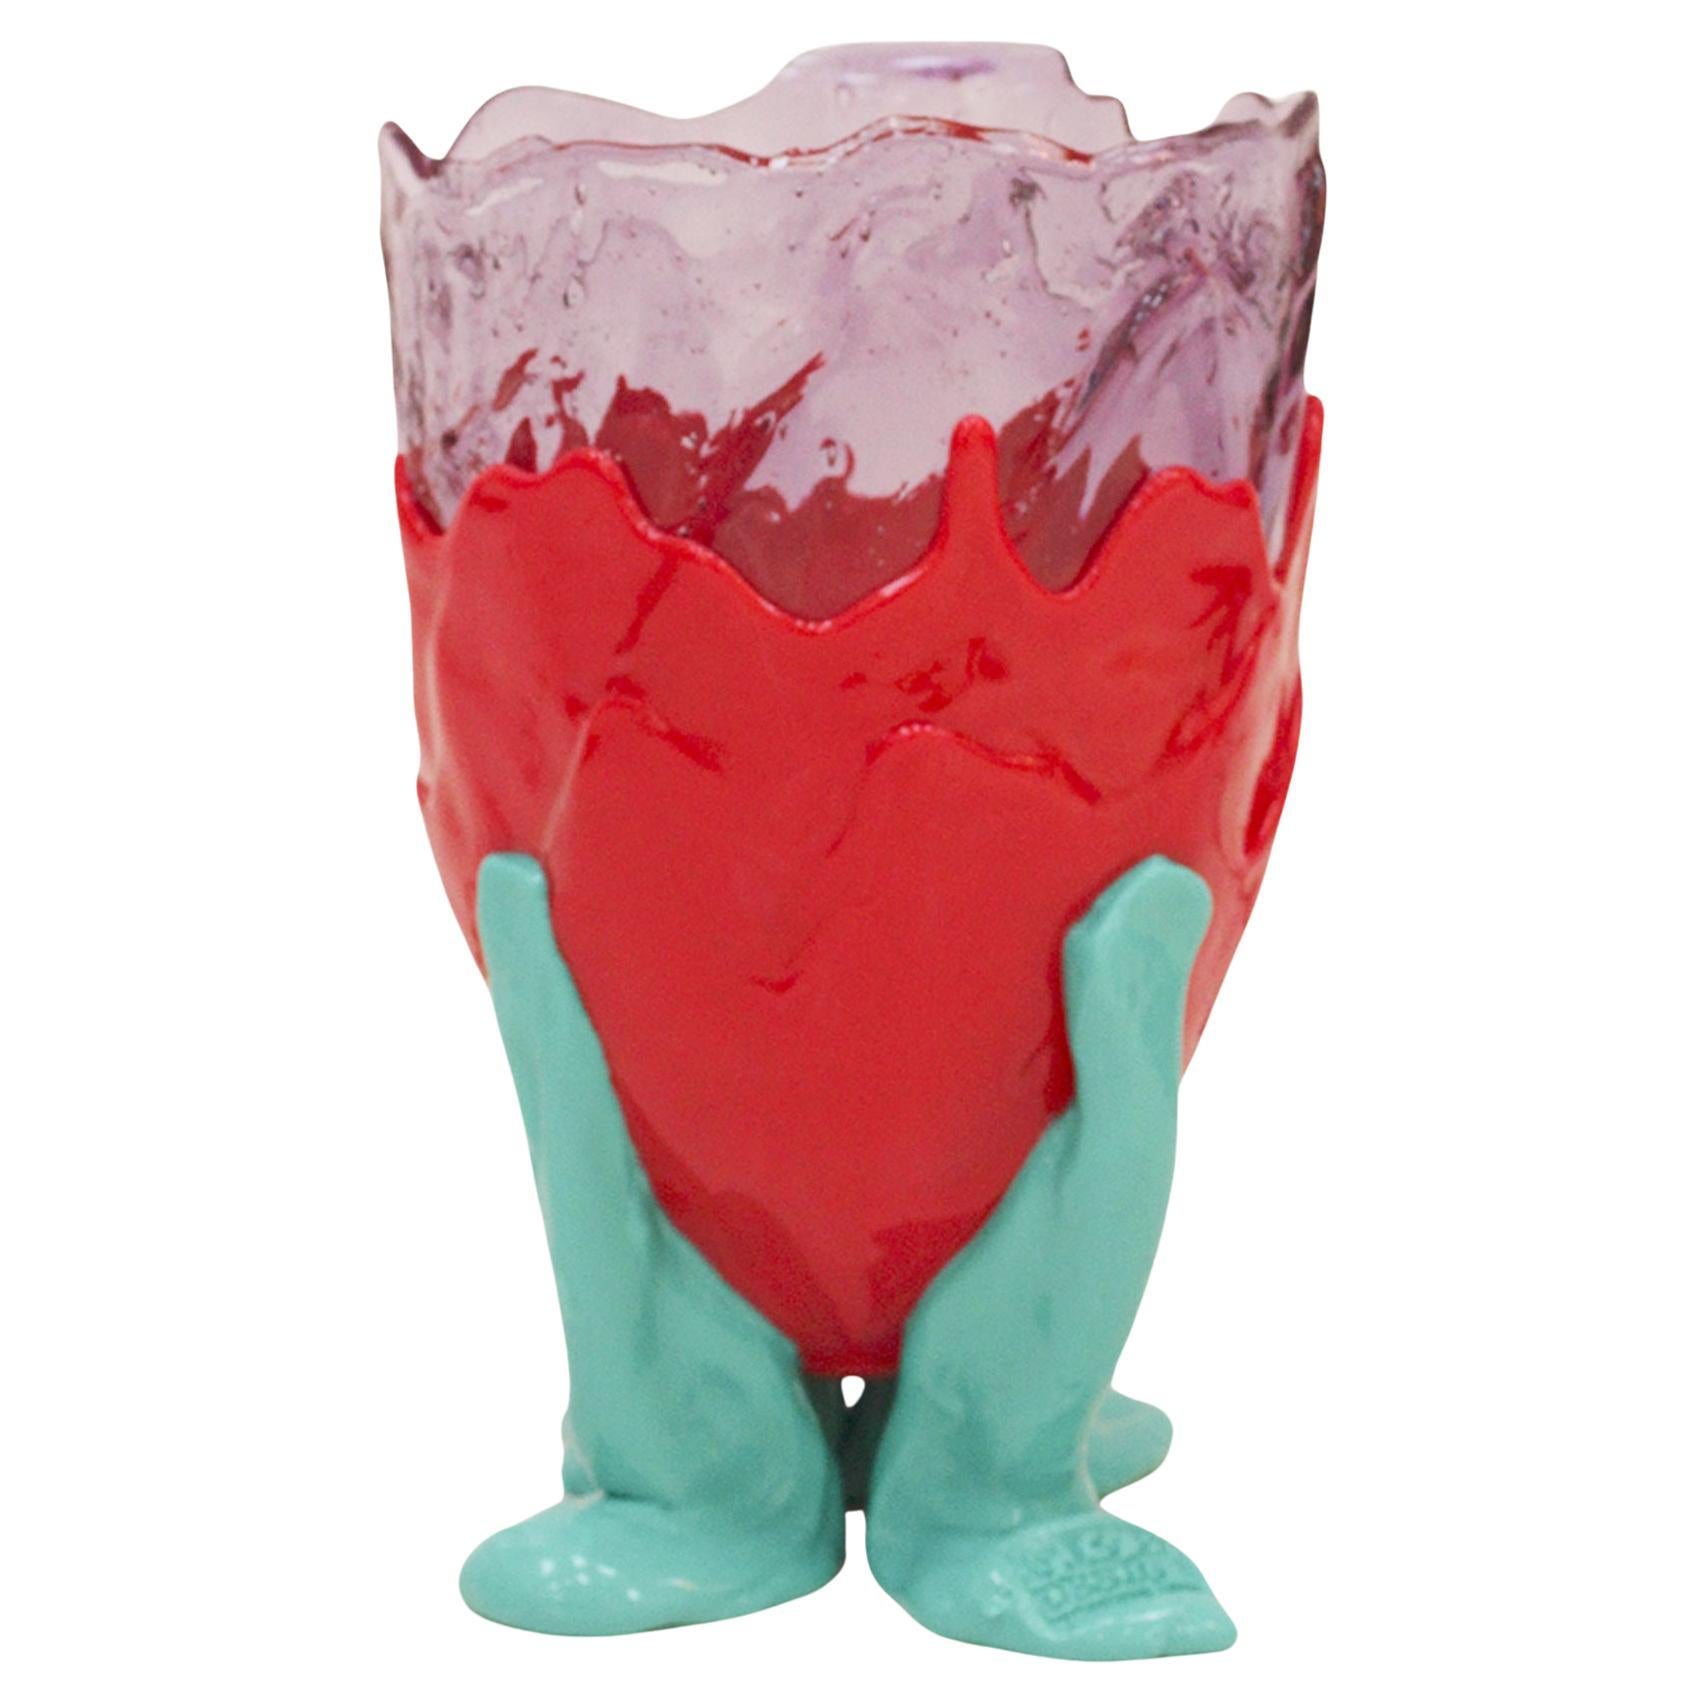 Italian Arty Vase Designed By Gaetano Pesce and Made of Colored Resin